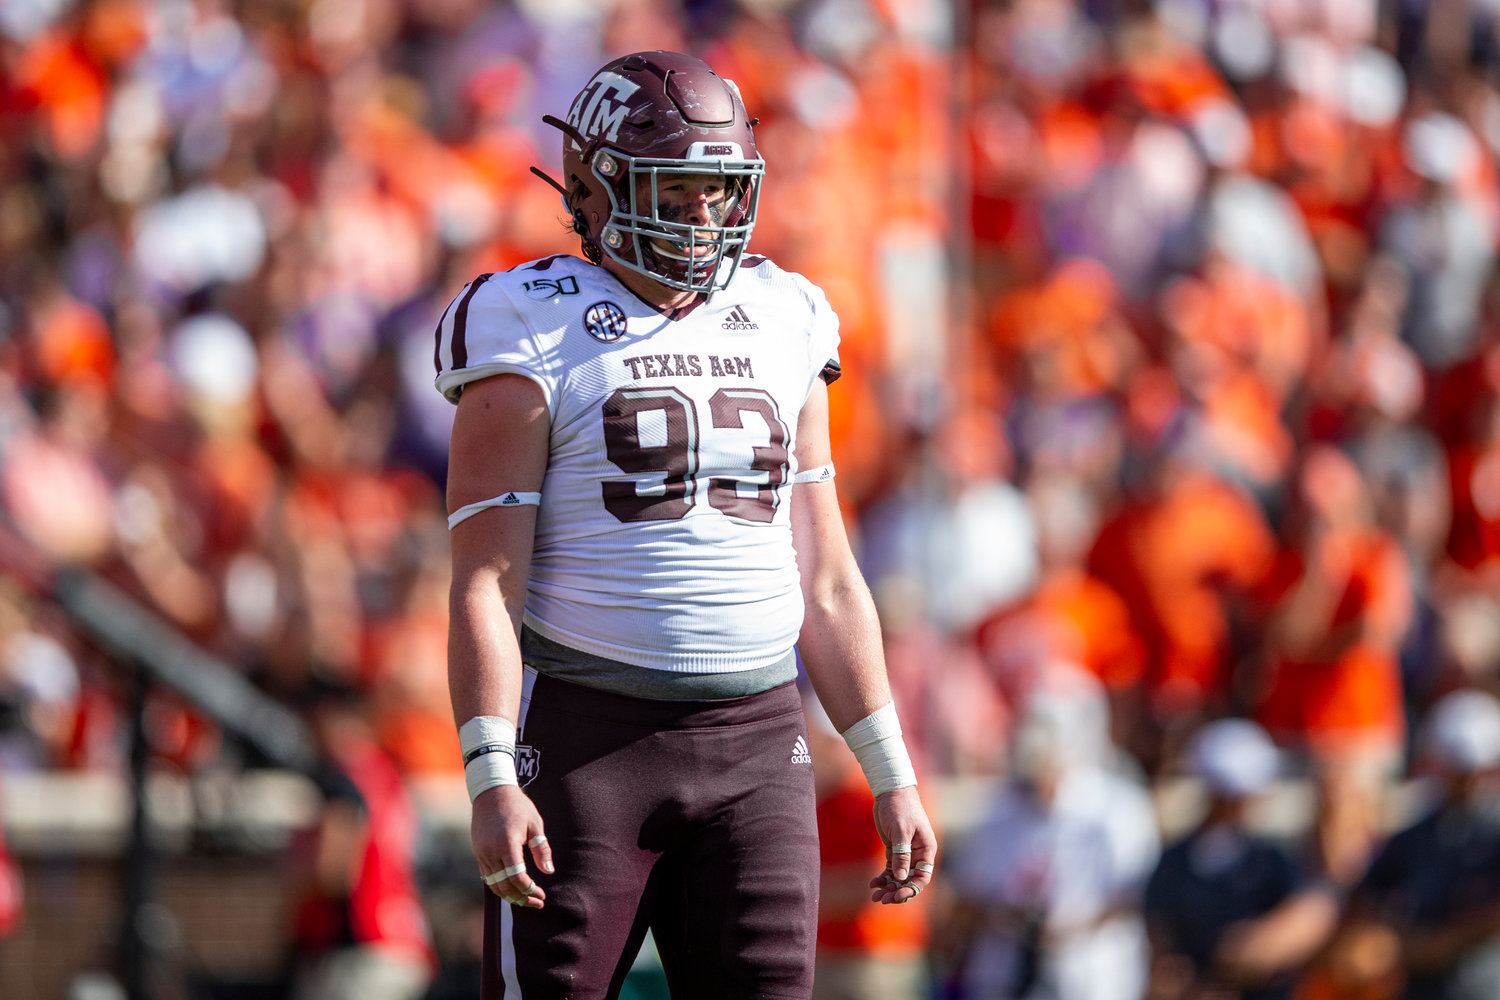 CLEMSON, SC - SEPTEMBER 07, 2019 - defensive lineman Max Wright #93 of the Texas A&M Aggies during the game between the Clemson Tigers and the Texas A&M Aggies at Clemson Memorial Stadium in Clemson, SC. Photo By Craig Bisacre/Texas A&M Athletics